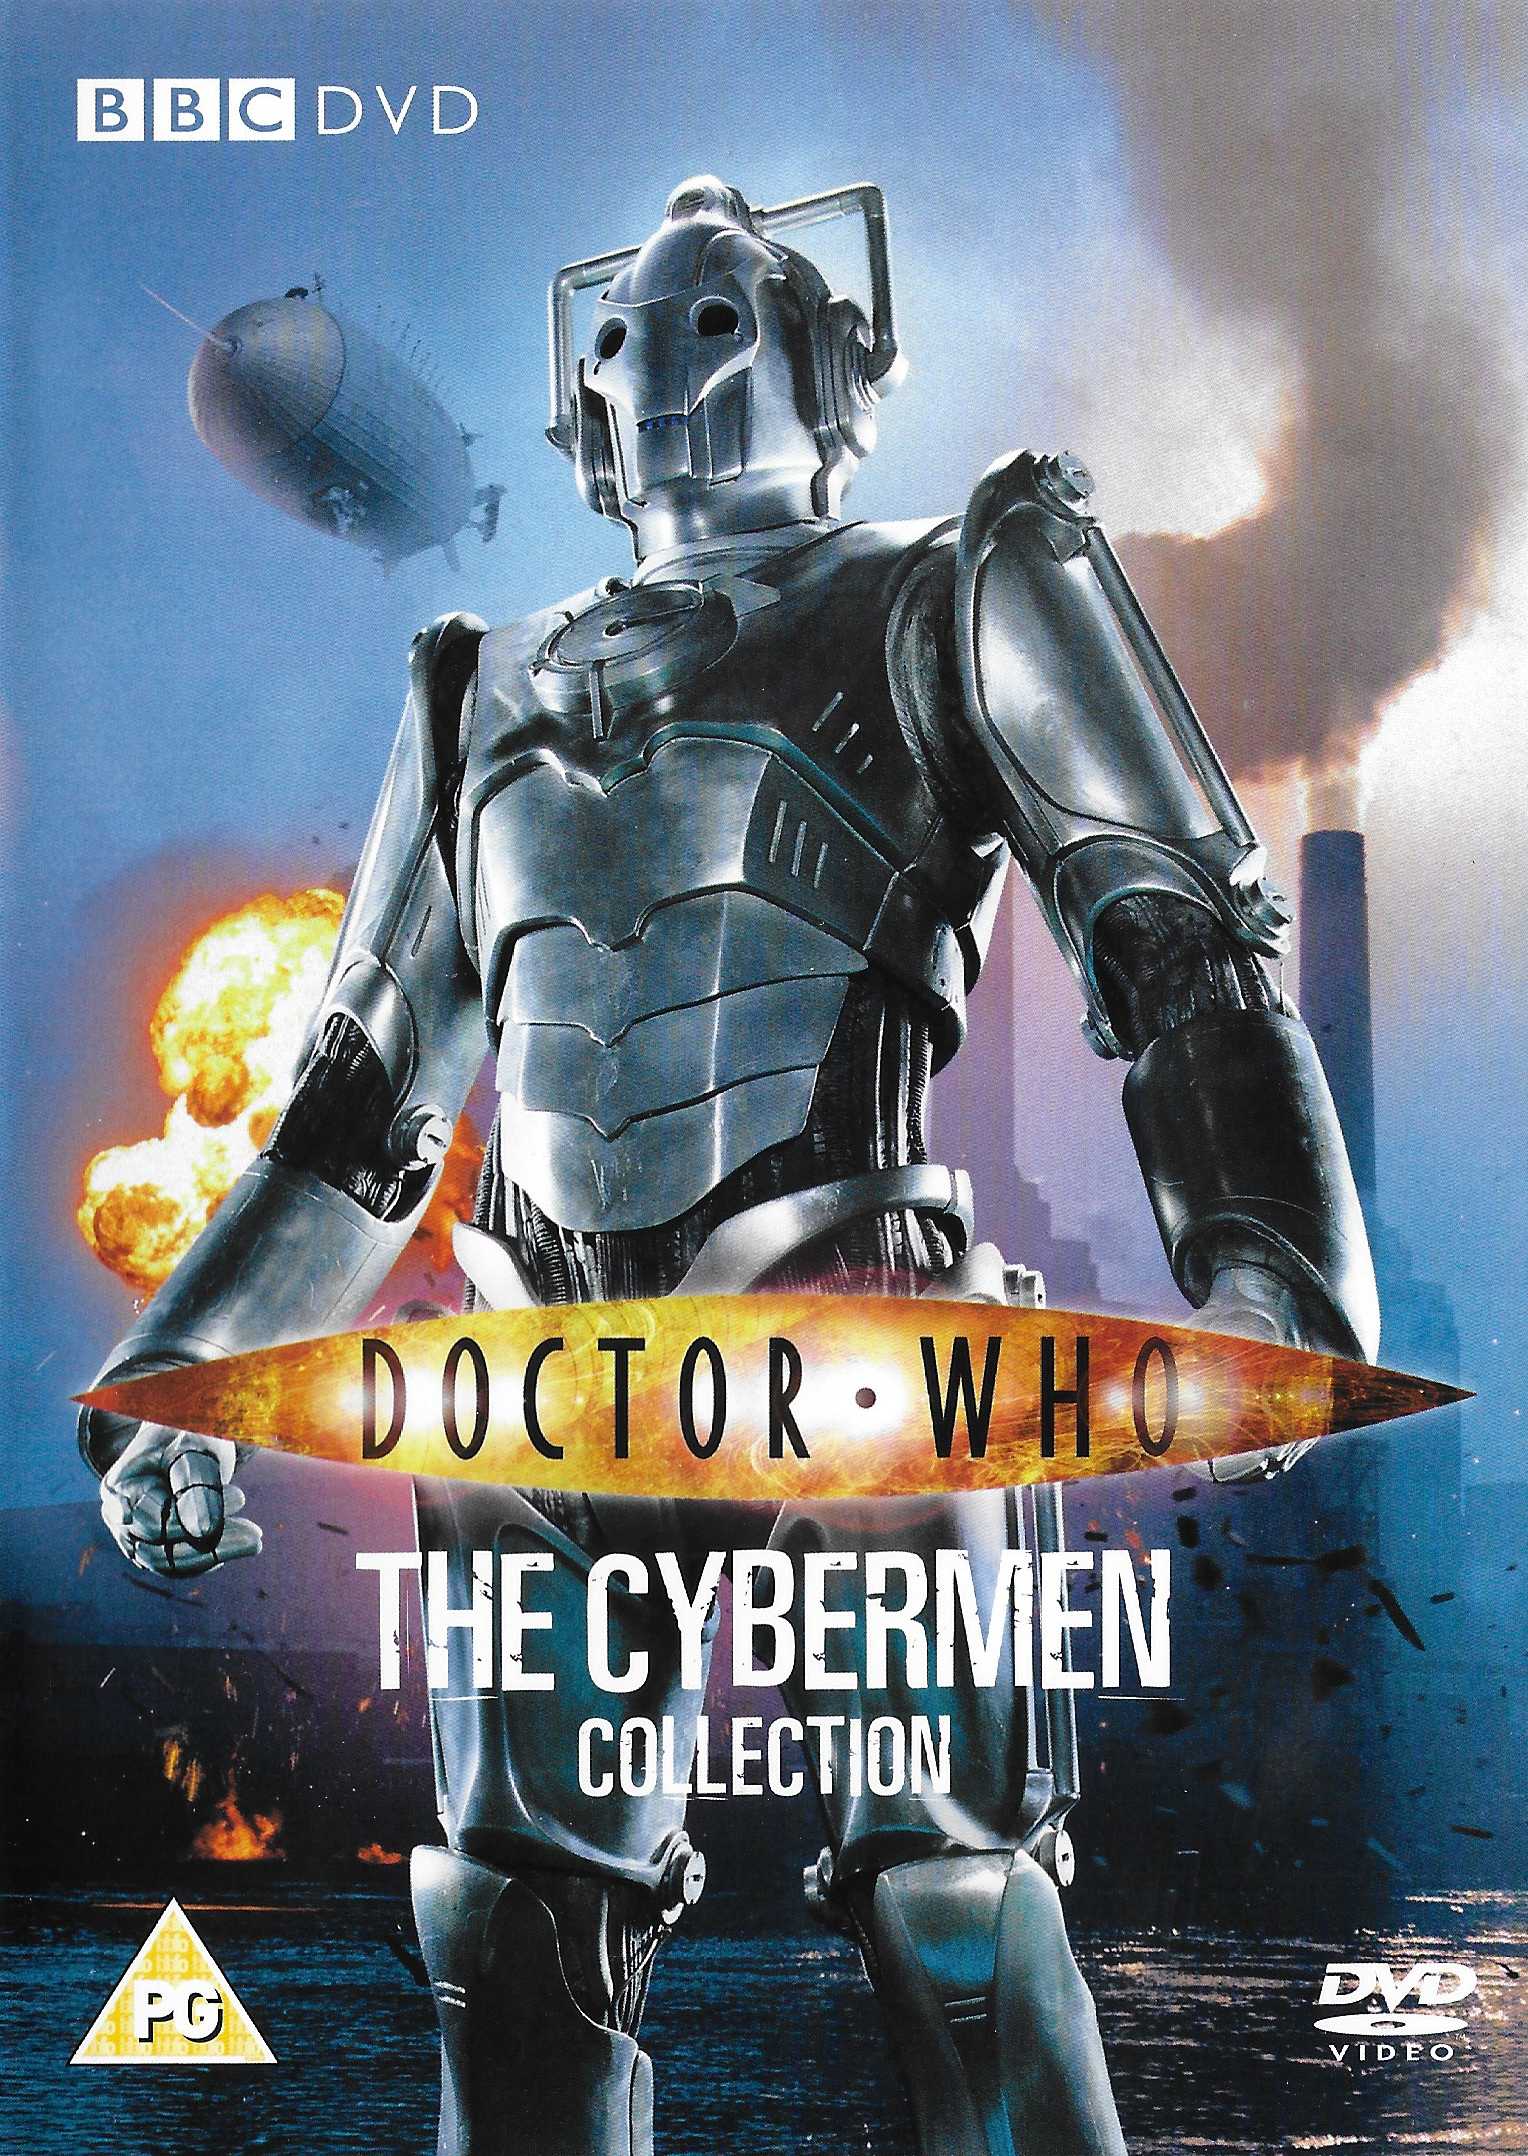 Picture of BBCDVD 2905 Doctor Who - The Cyberman collection by artist Tom MacRae / Russell T Davies from the BBC records and Tapes library